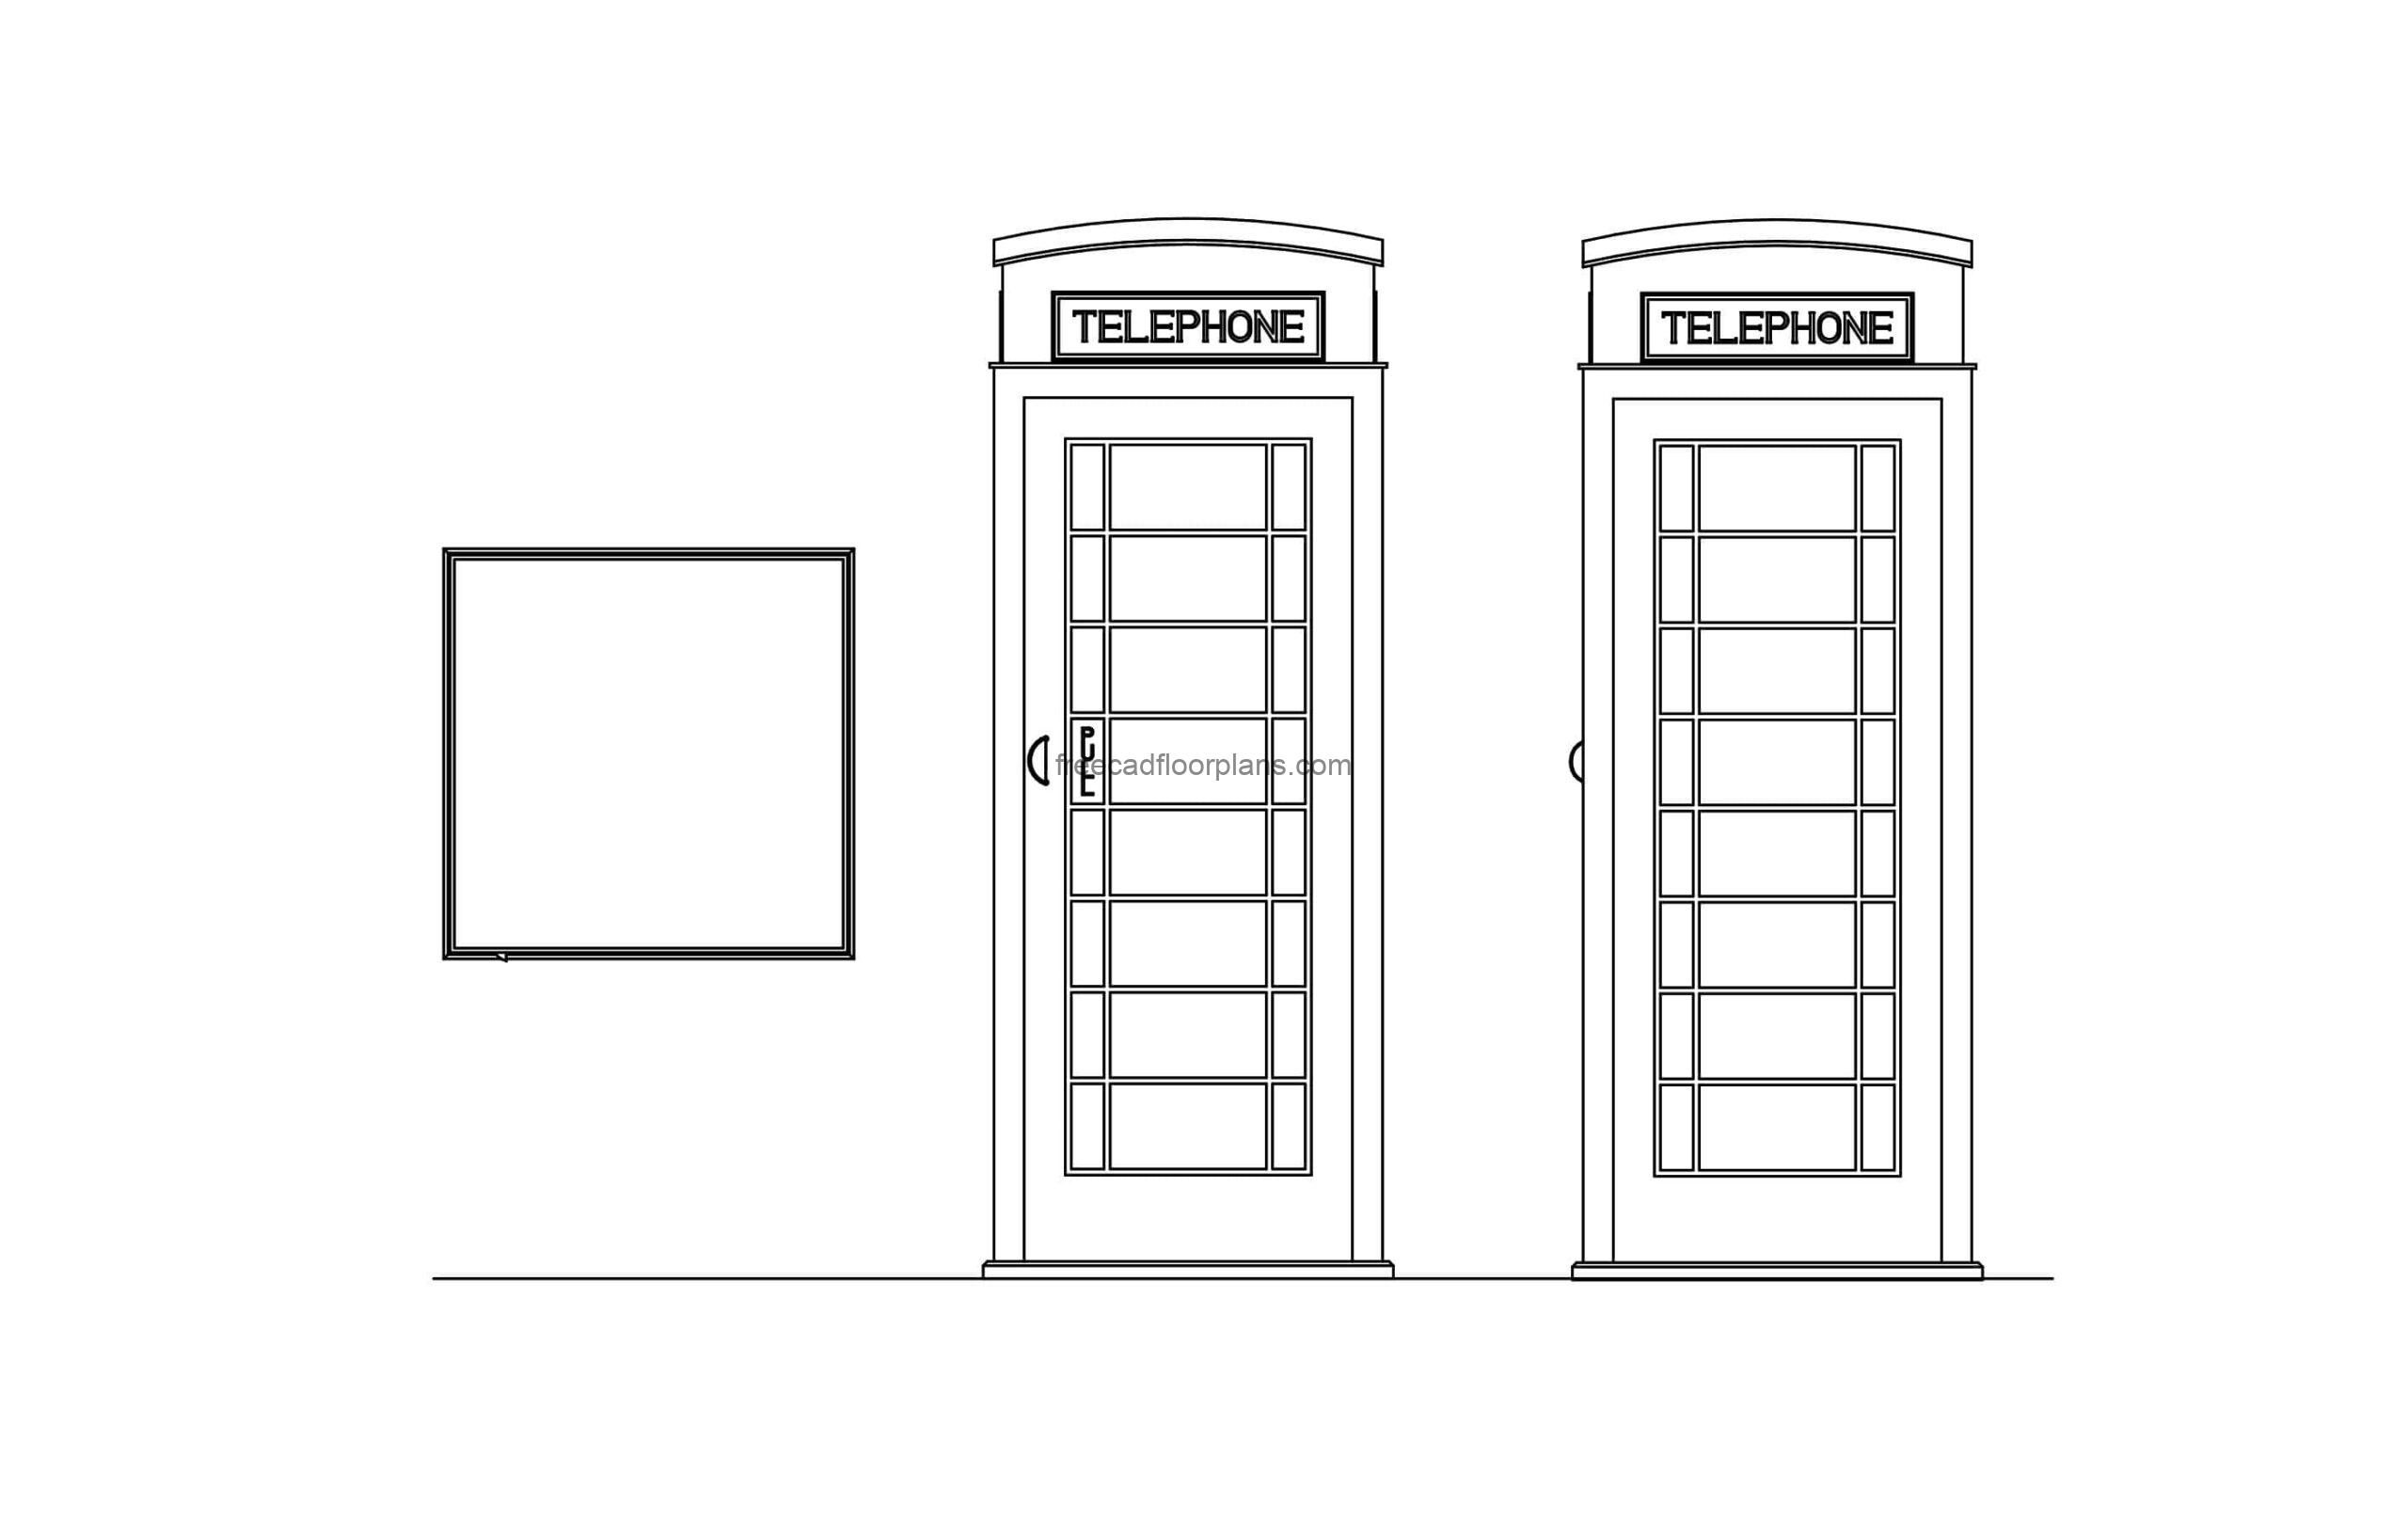 phone booth autocad drawing 2d plan and elevations file for free downloa dwg model